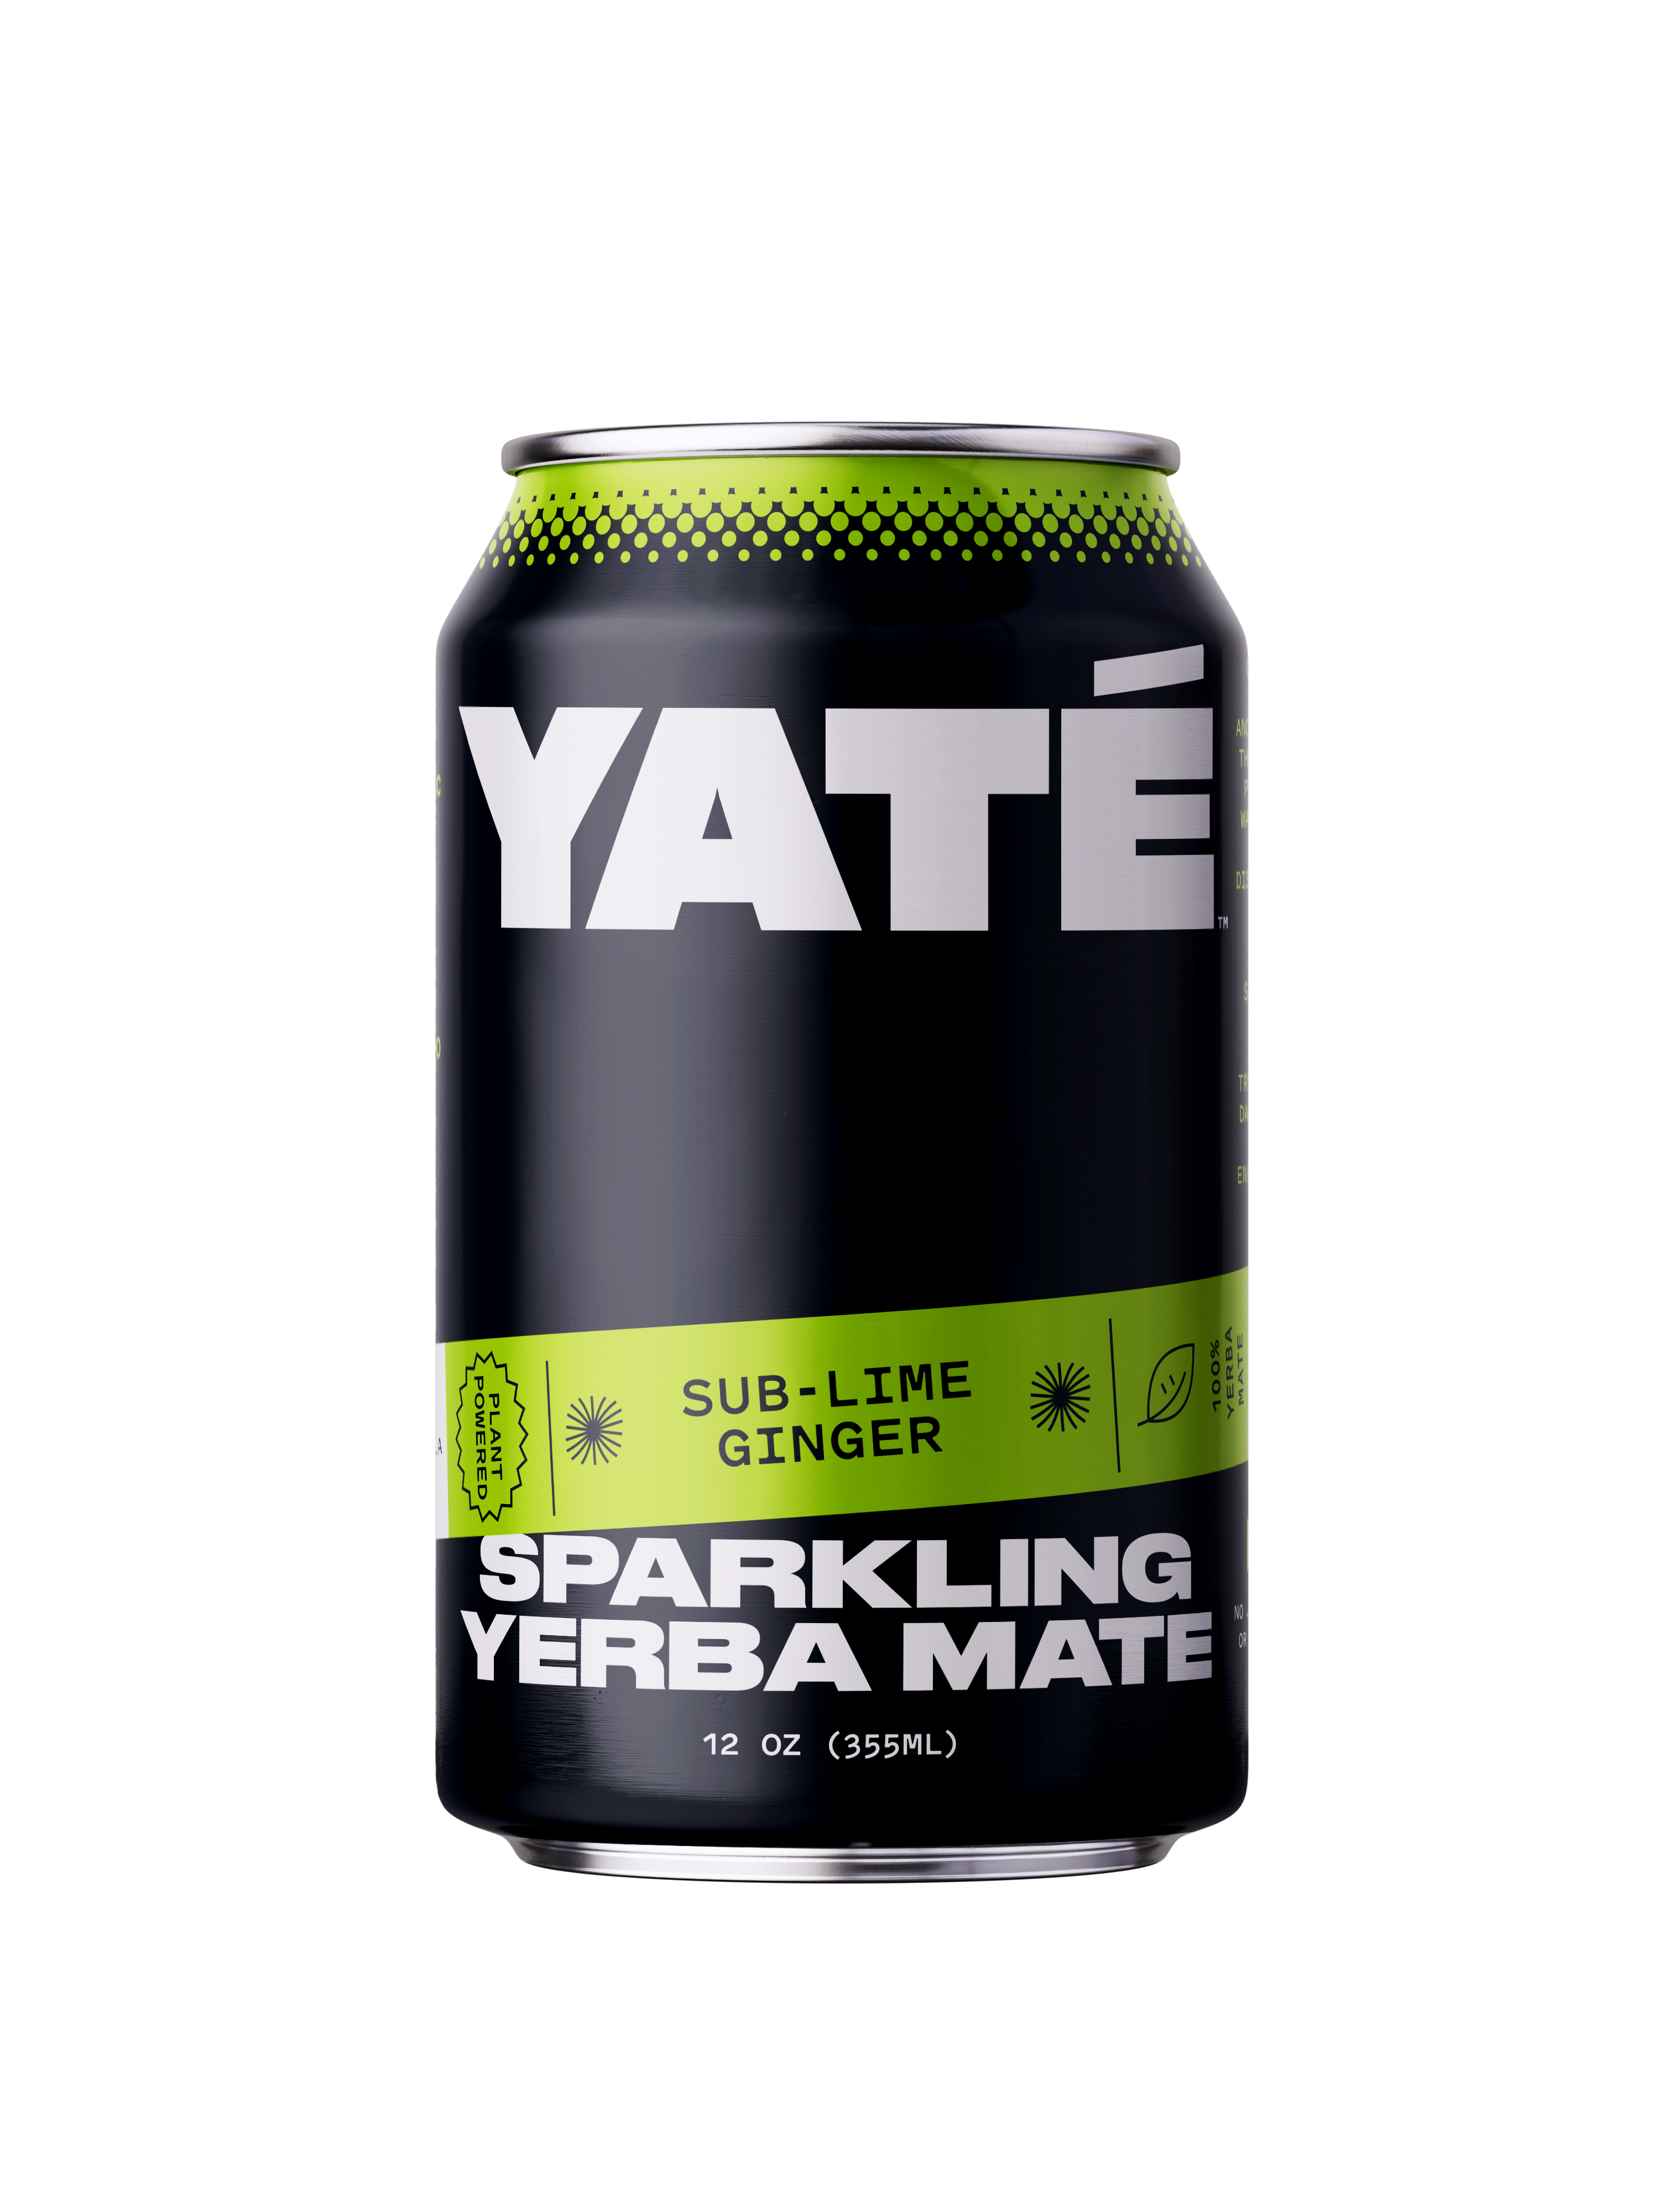 Yate Yerba Mate Sub-Lime Ginger Flavor 12oz Can